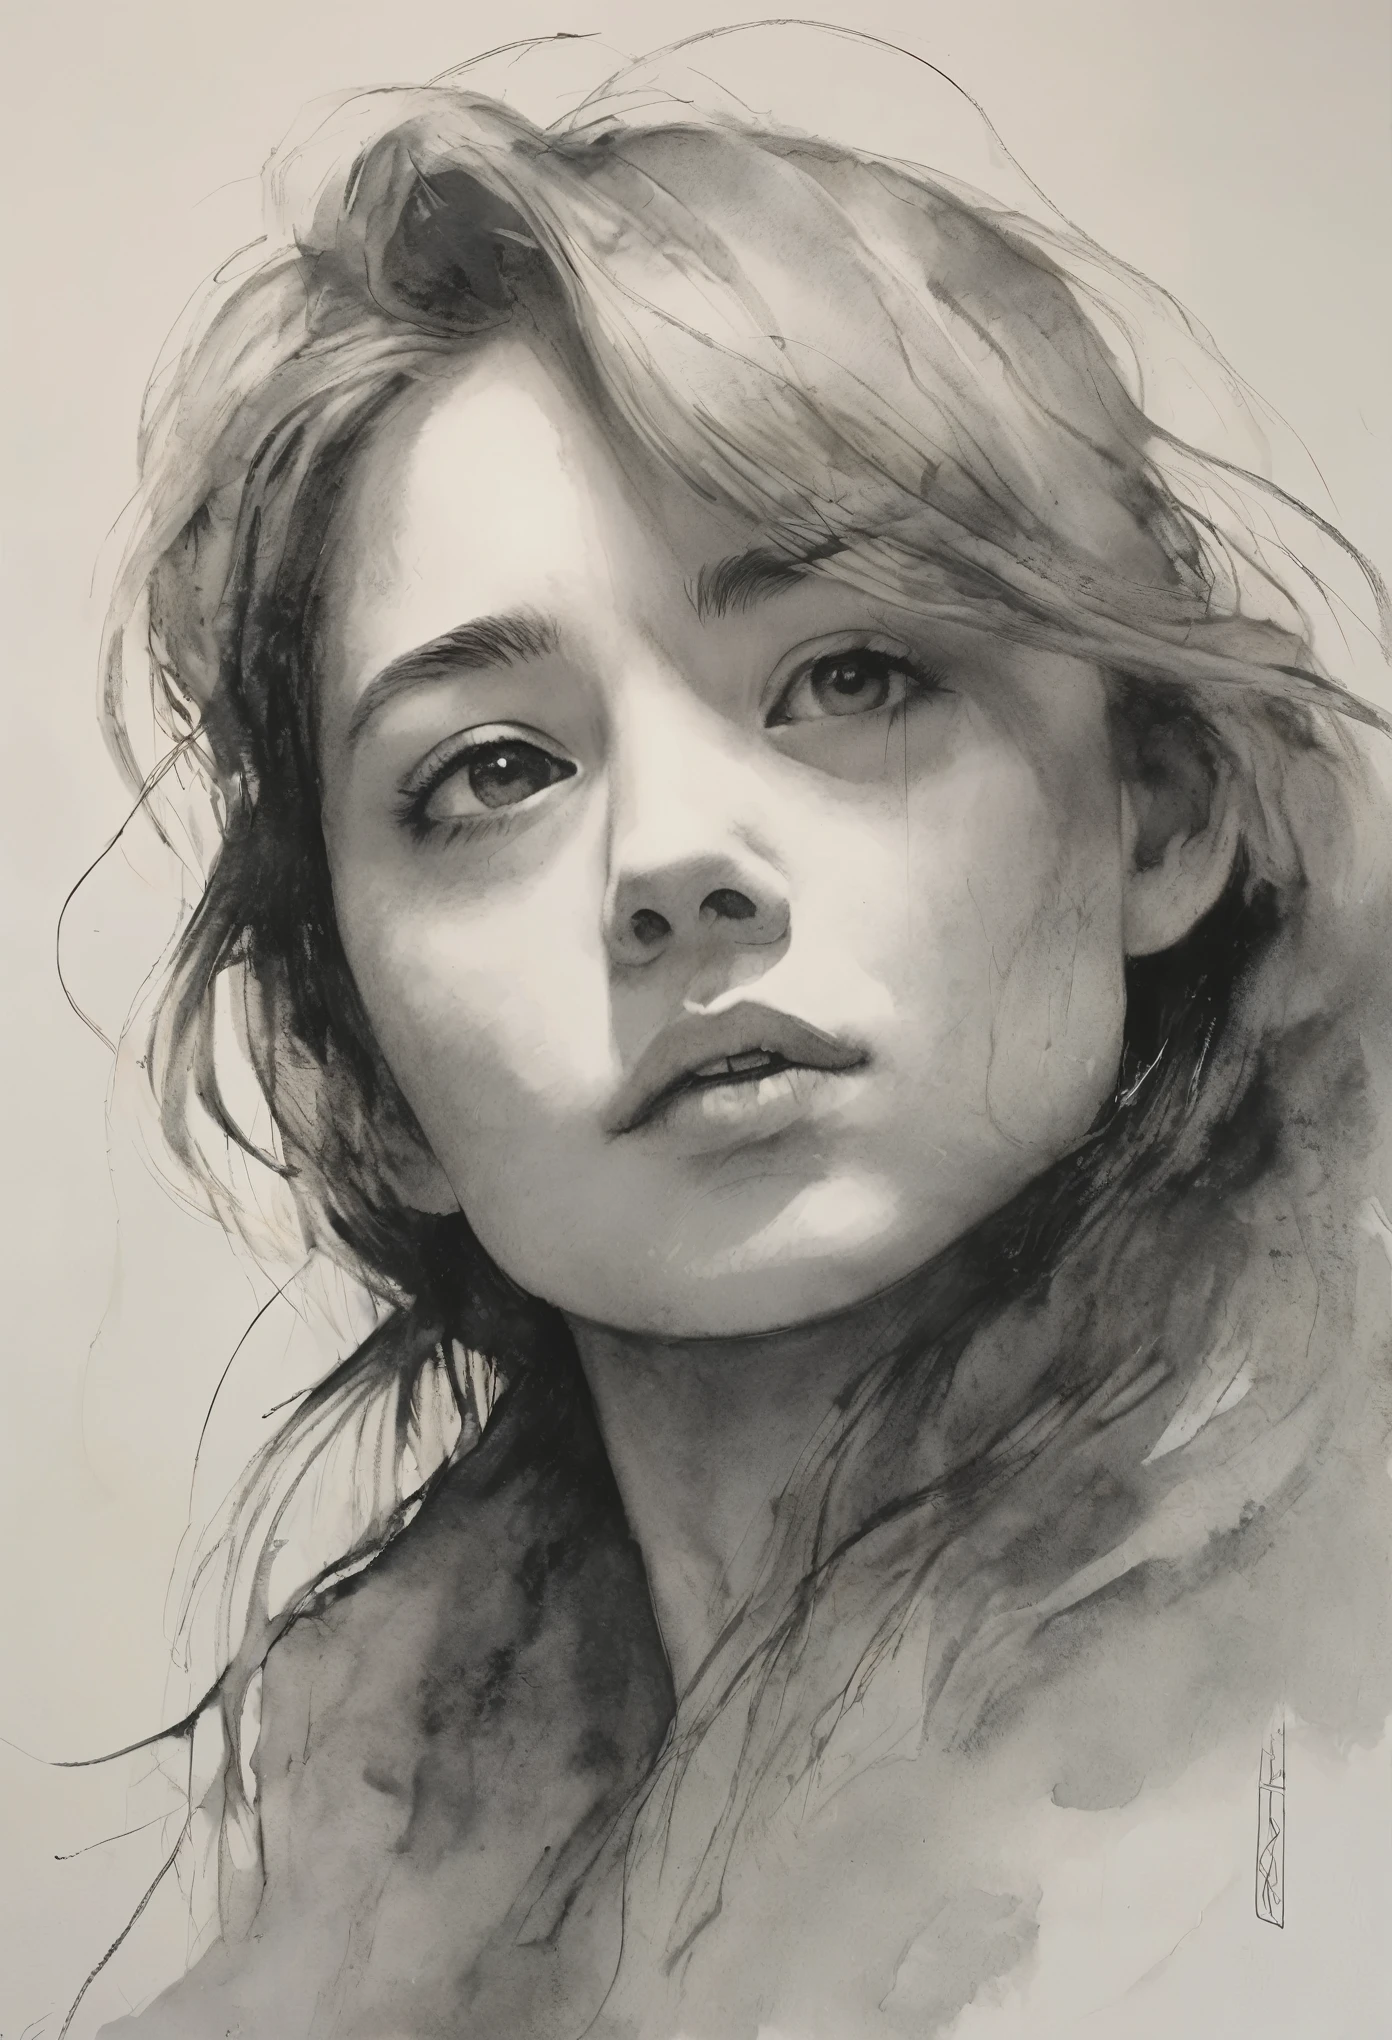 (highest quality, High resolution, masterpiece:1.2), Super detailed, actual:1.37, Black ink sketch, smooth lines, Expressive facial expressions and gestures, simple background, Emphasis on light and shadow and spatial perception, Plenty of negative space, young girl.Ink Portrait,smooth lines,Expressive facial features,Subtle emotions,Ink strength comparison,simple background,Emphasis on light and shadow,wide々It was,Plenty of negative space,peaceful atmosphere,peaceful atmosphere,feels like a dream,Delicate yet fascinating details,pastel colour,Calm and introspective,An elegant gesture,Gentle movements,Calm and innocent,Elegant Whisper,quiet and elegant,shining,sublime beauty,Vector illustration,black and white,Natural and Organic,Nourish、Calming the mind,Sublime simplicity,fantastic charm.